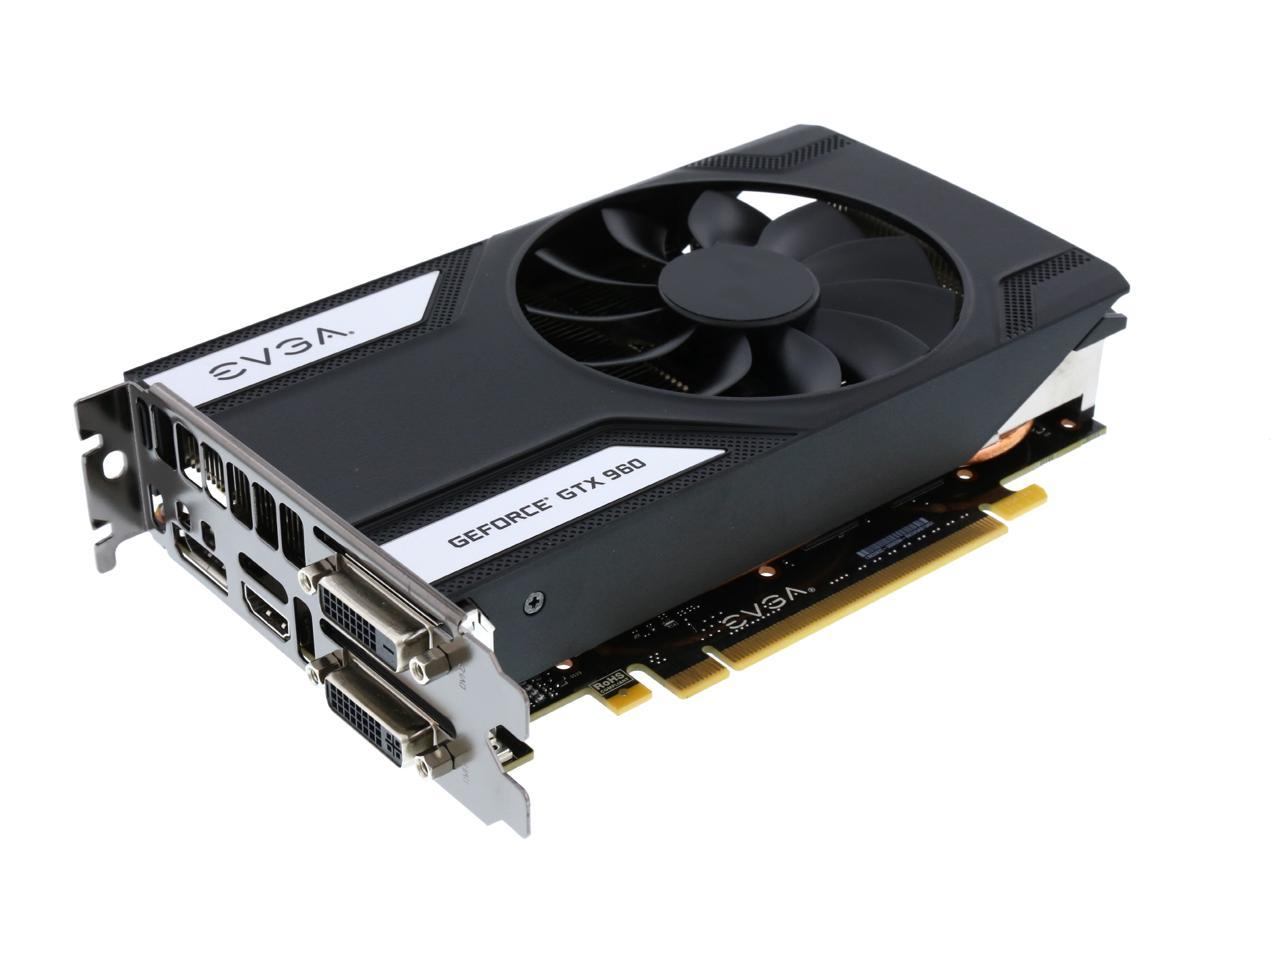 Evga Geforce Gtx 960 04g P4 3962 Kr 4gb Sc Gaming Only 6 8 Inches Perfect For Mitx Build Graphics Card Newegg Com